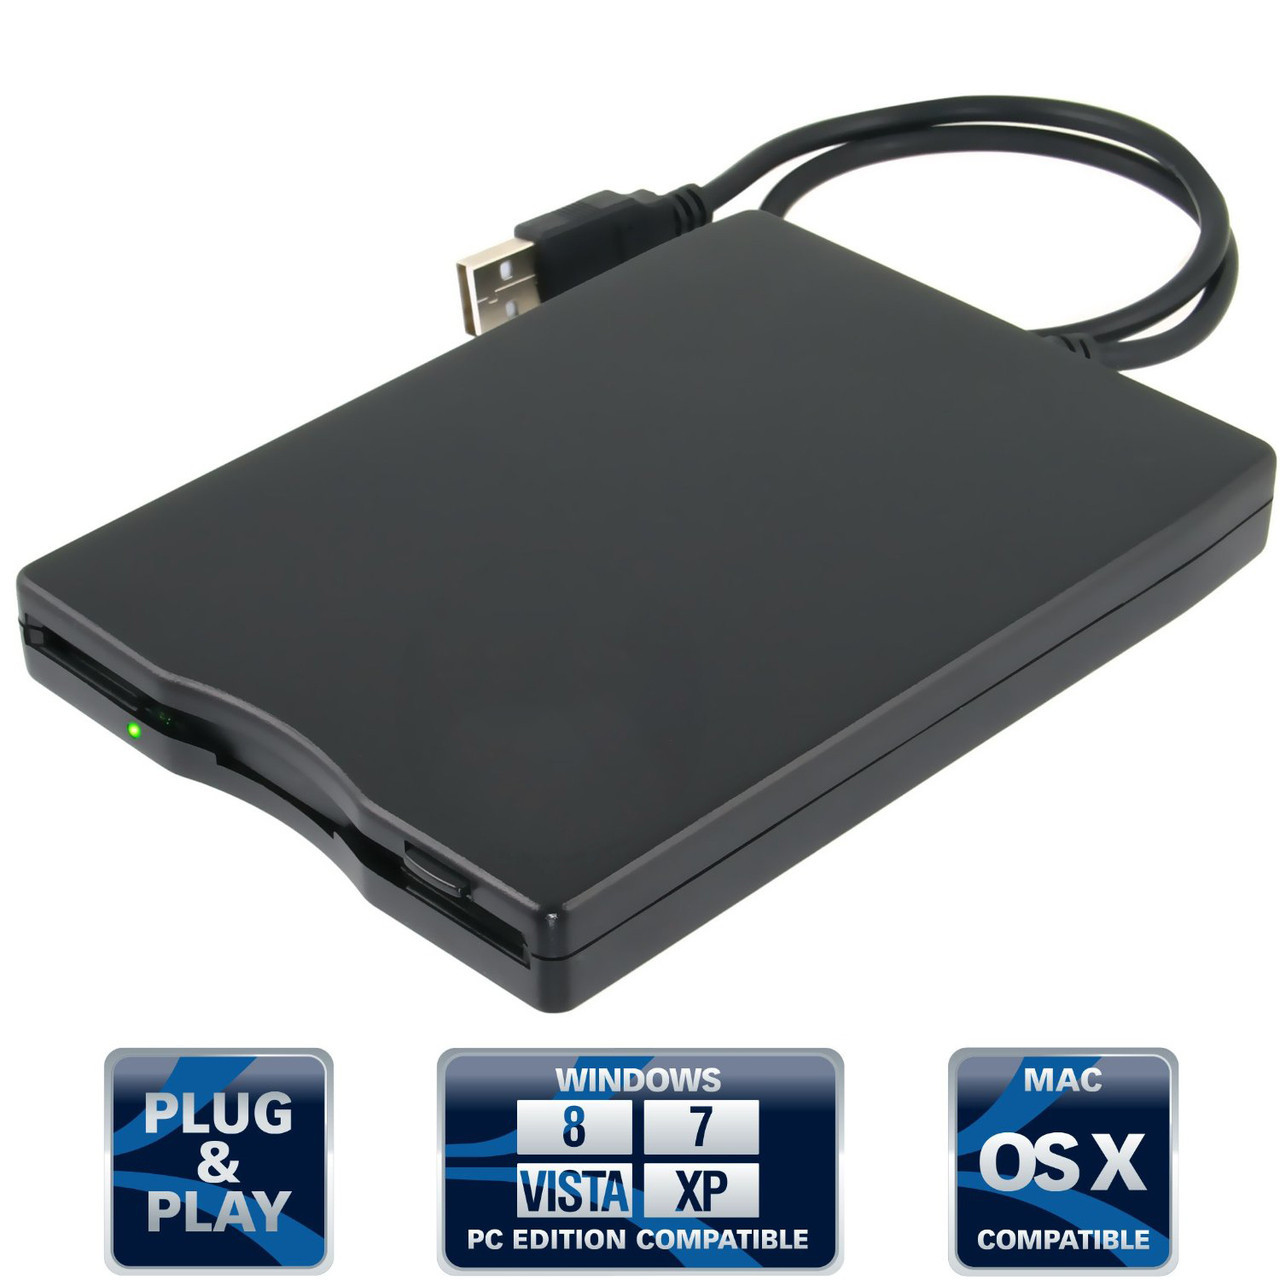 External USB 1.44 MB 2x Floppy Disk Drive Black - StenoWorks The Court  Reporting Store